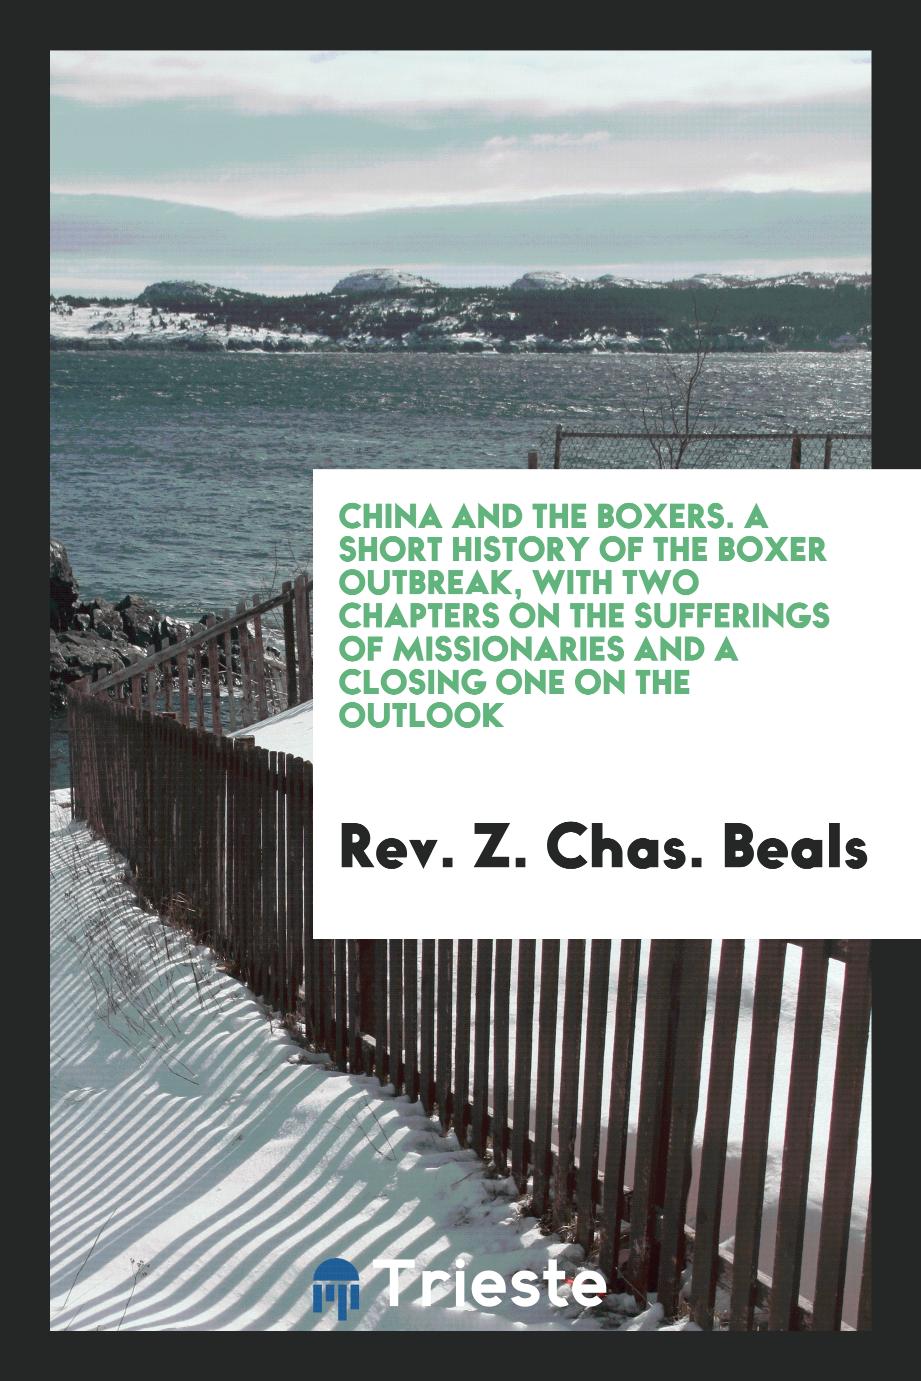 China and the Boxers. A Short History of the Boxer Outbreak, with Two Chapters on the Sufferings of Missionaries and a Closing One on the Outlook